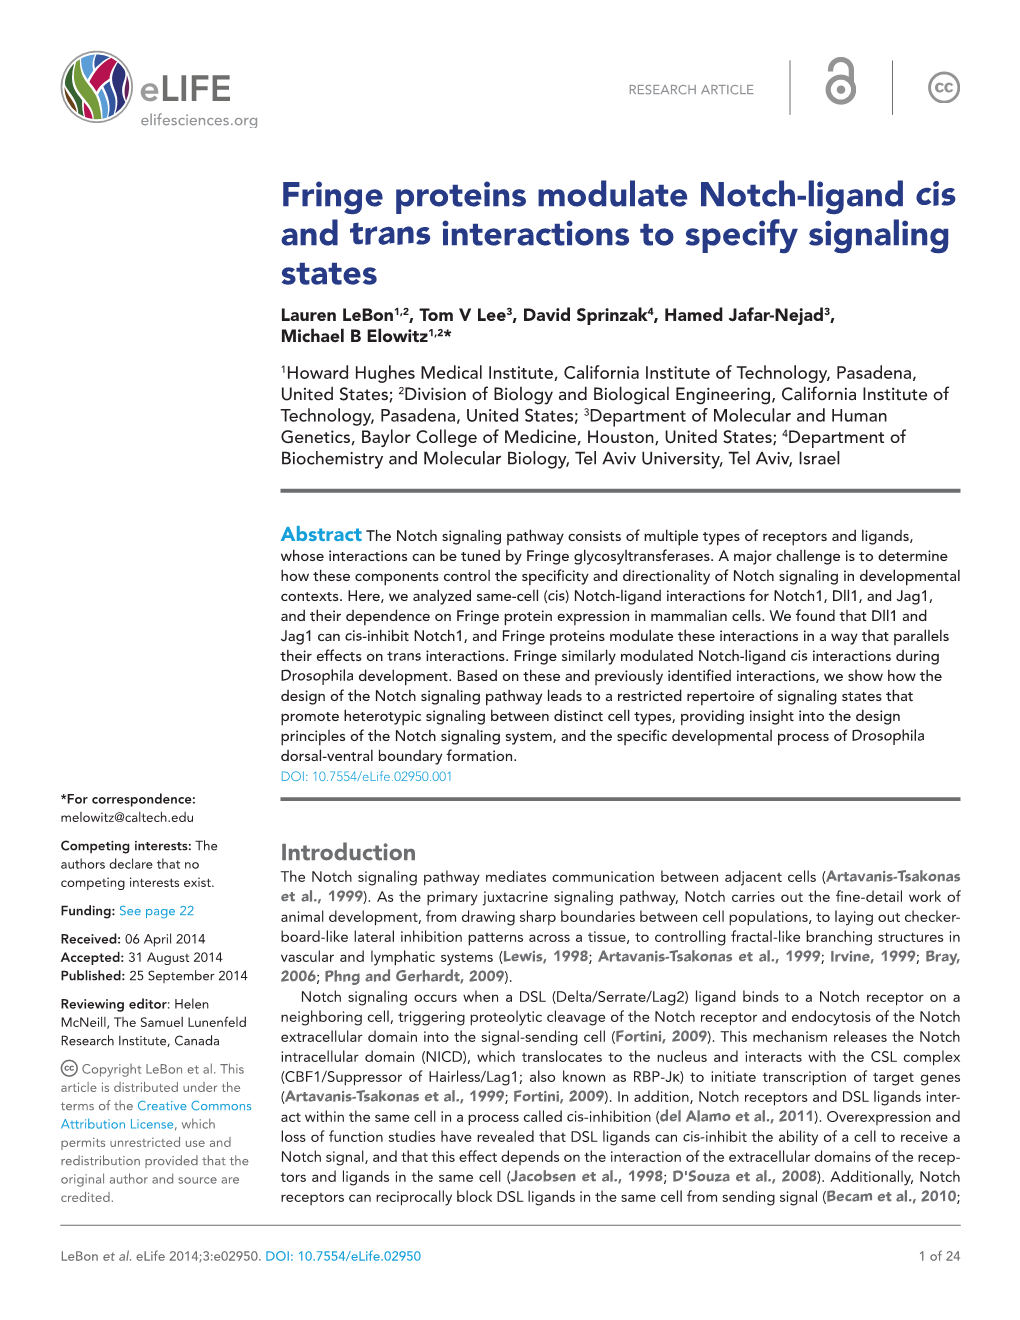 Fringe Proteins Modulate Notch-Ligand Cis and Trans